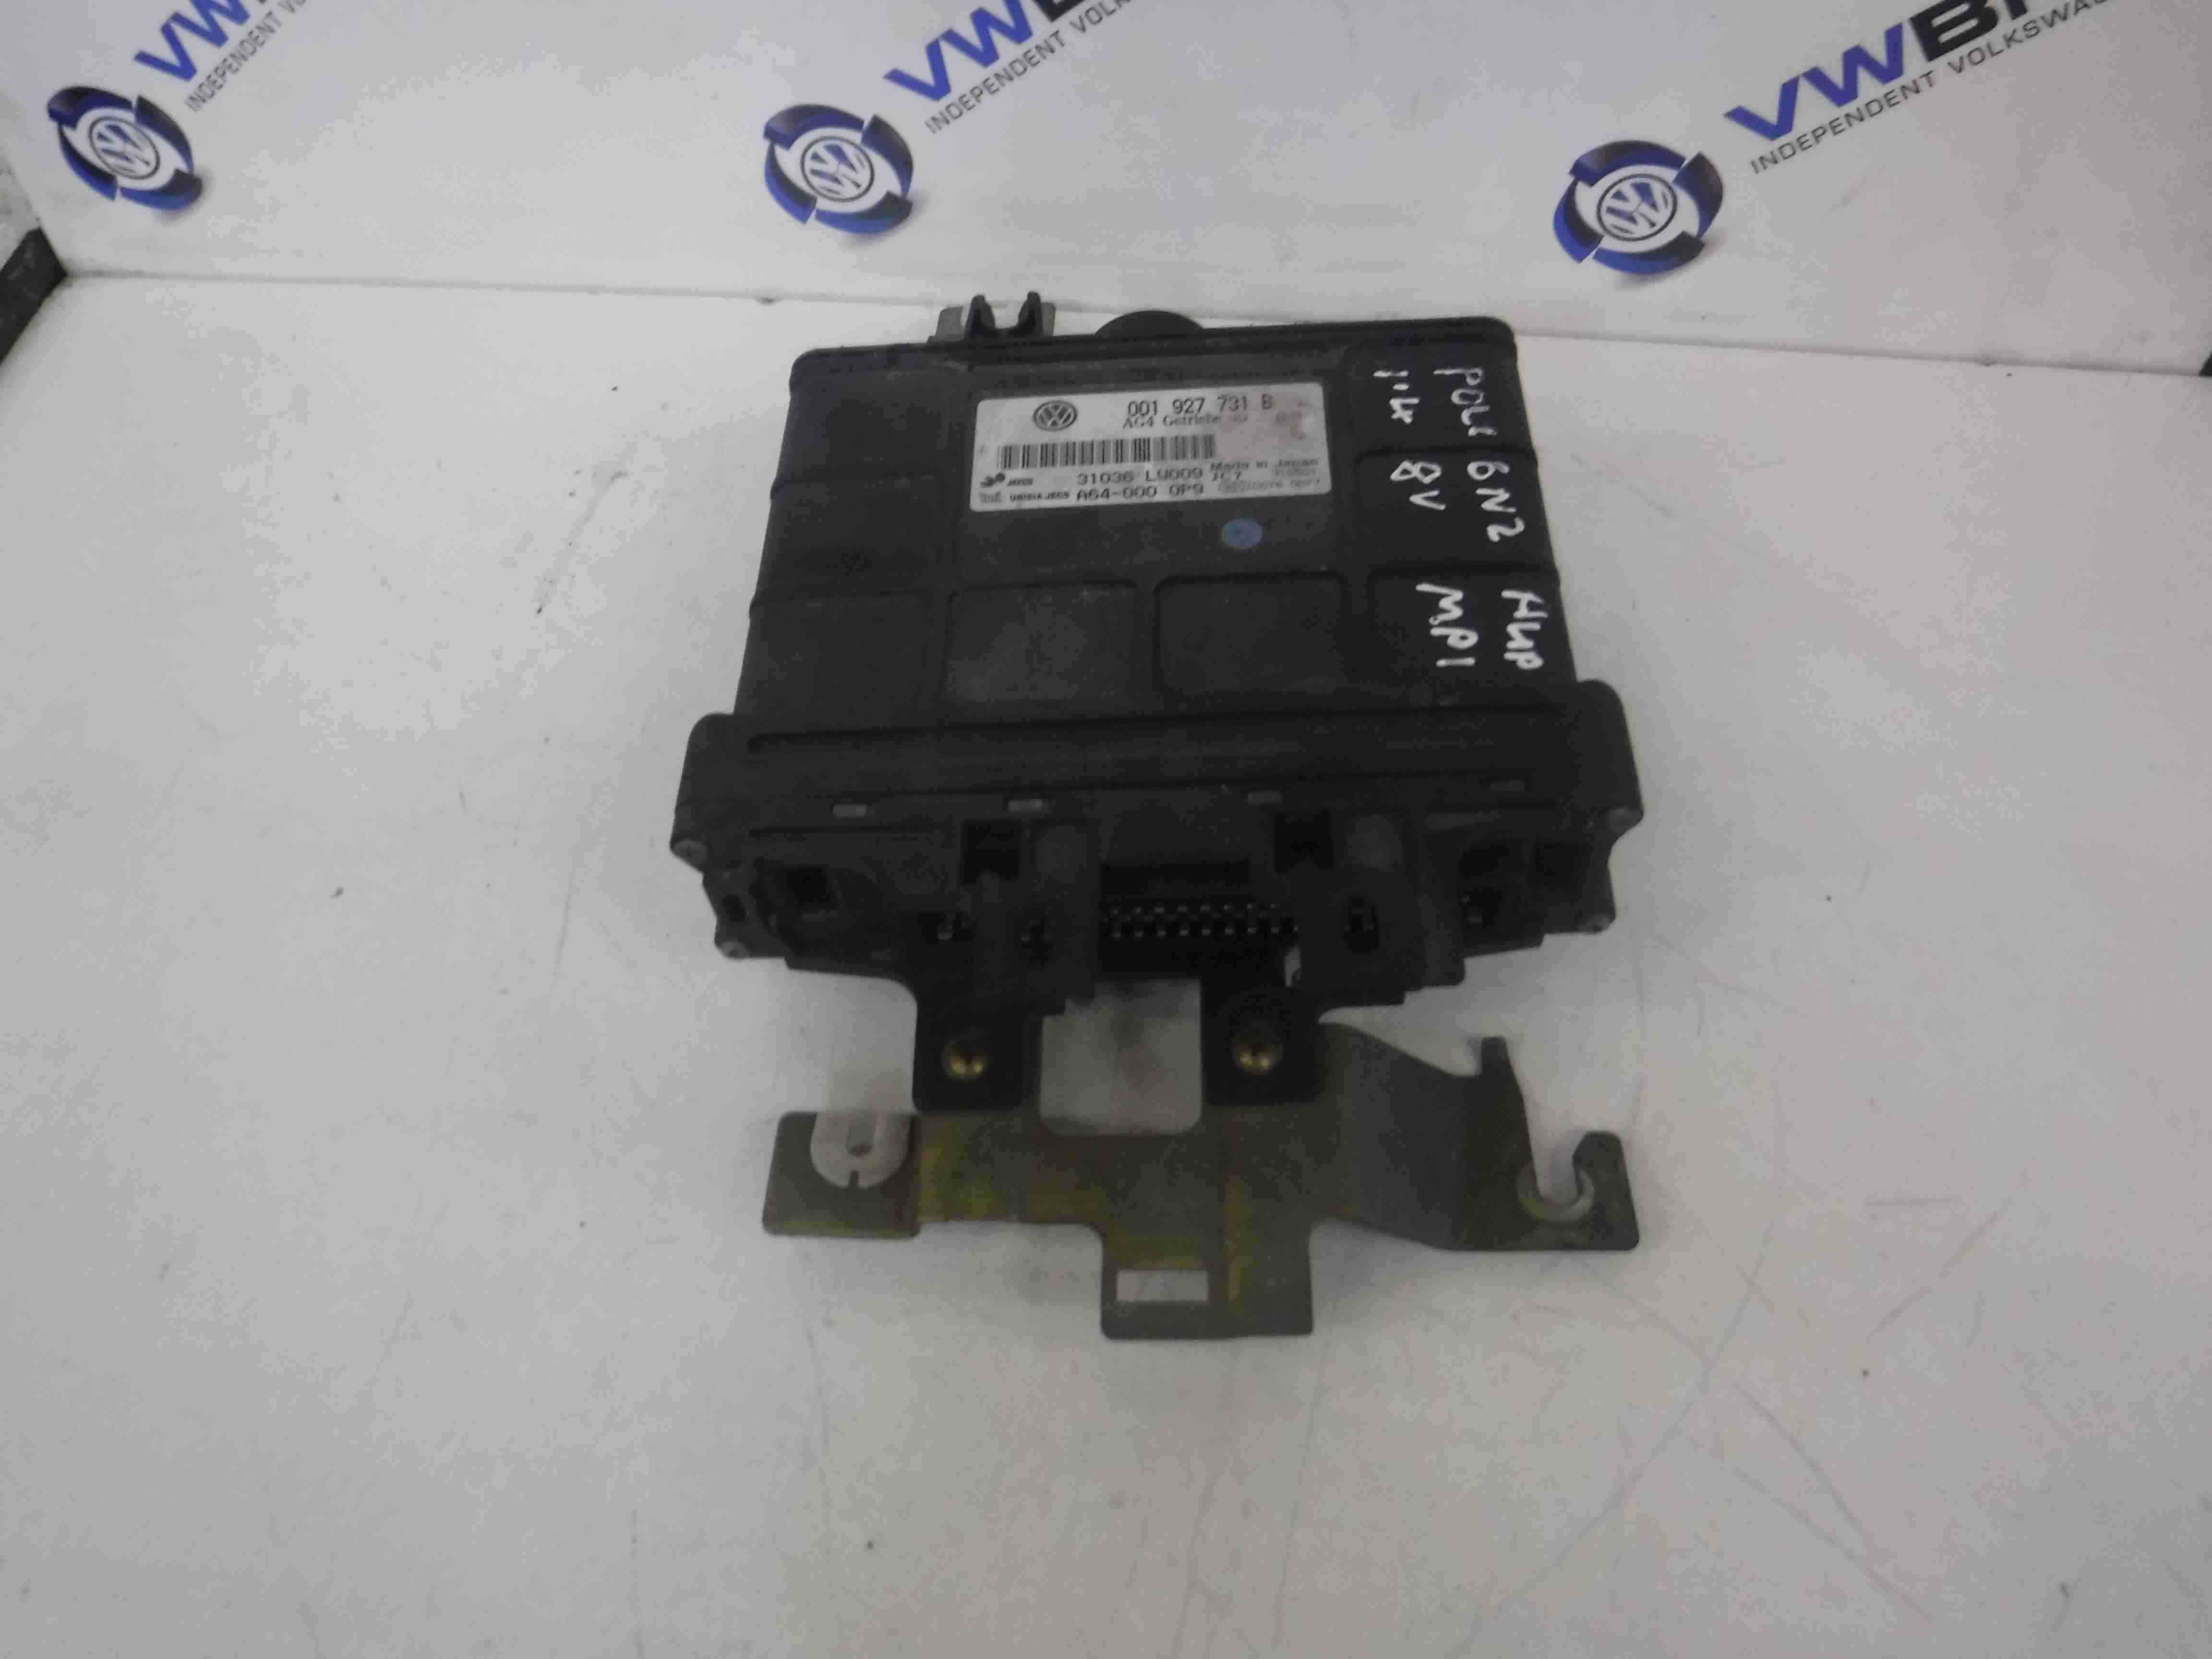 Volkswagen Polo 1999-2003 6N2 1.4 8v Automatic Gearbox ECU Computer 001927731B